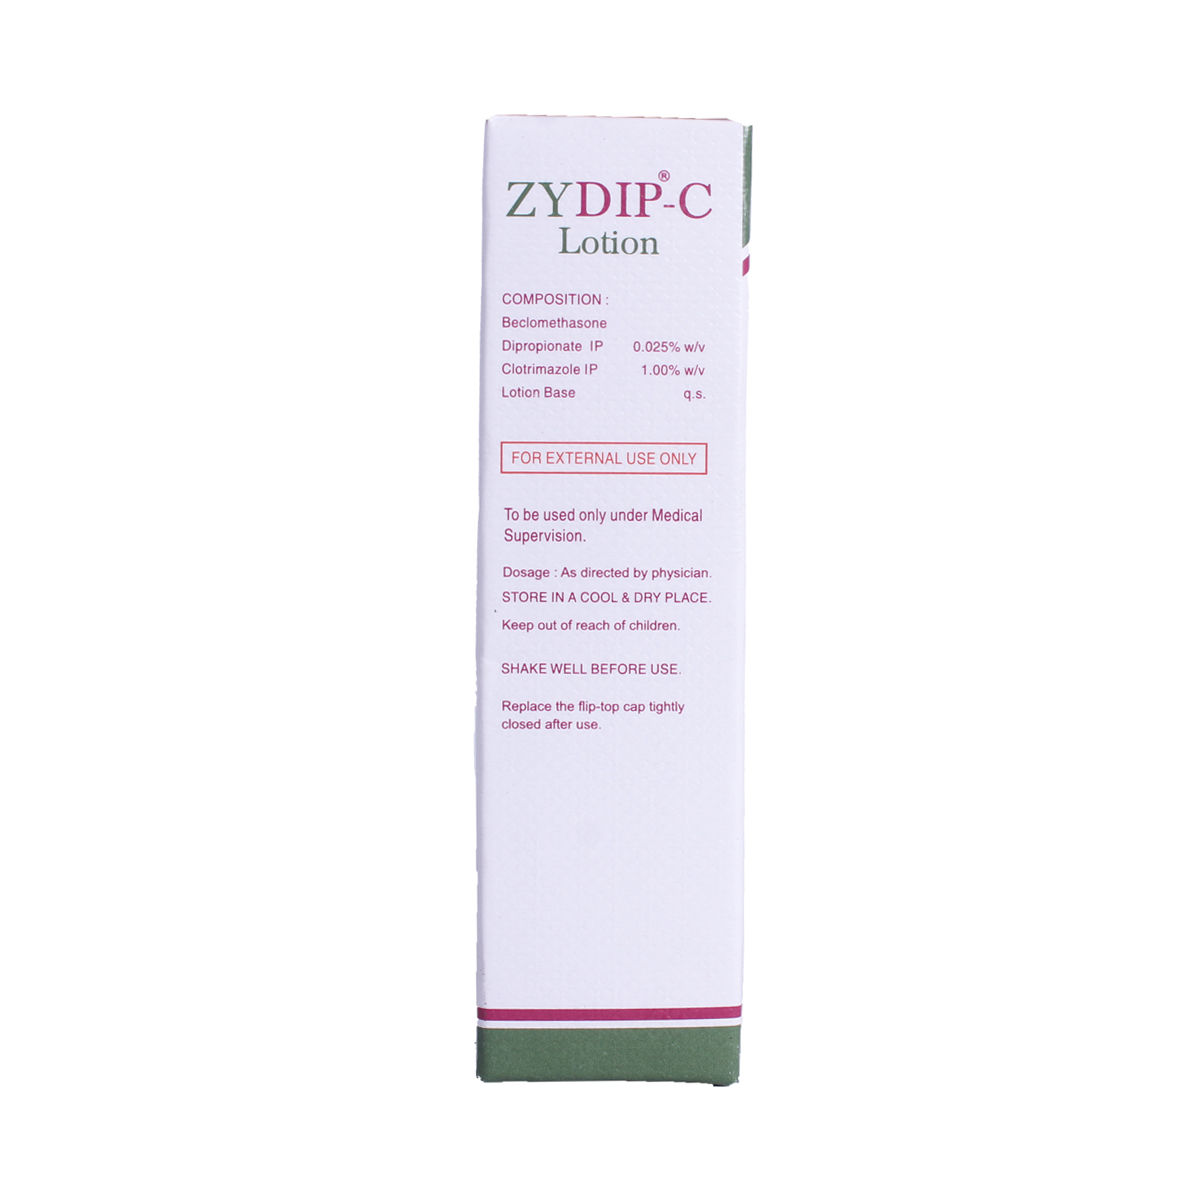 Zydip-C Lotion 30 ml Price, Uses, Side Effects, Composition - Apollo  Pharmacy